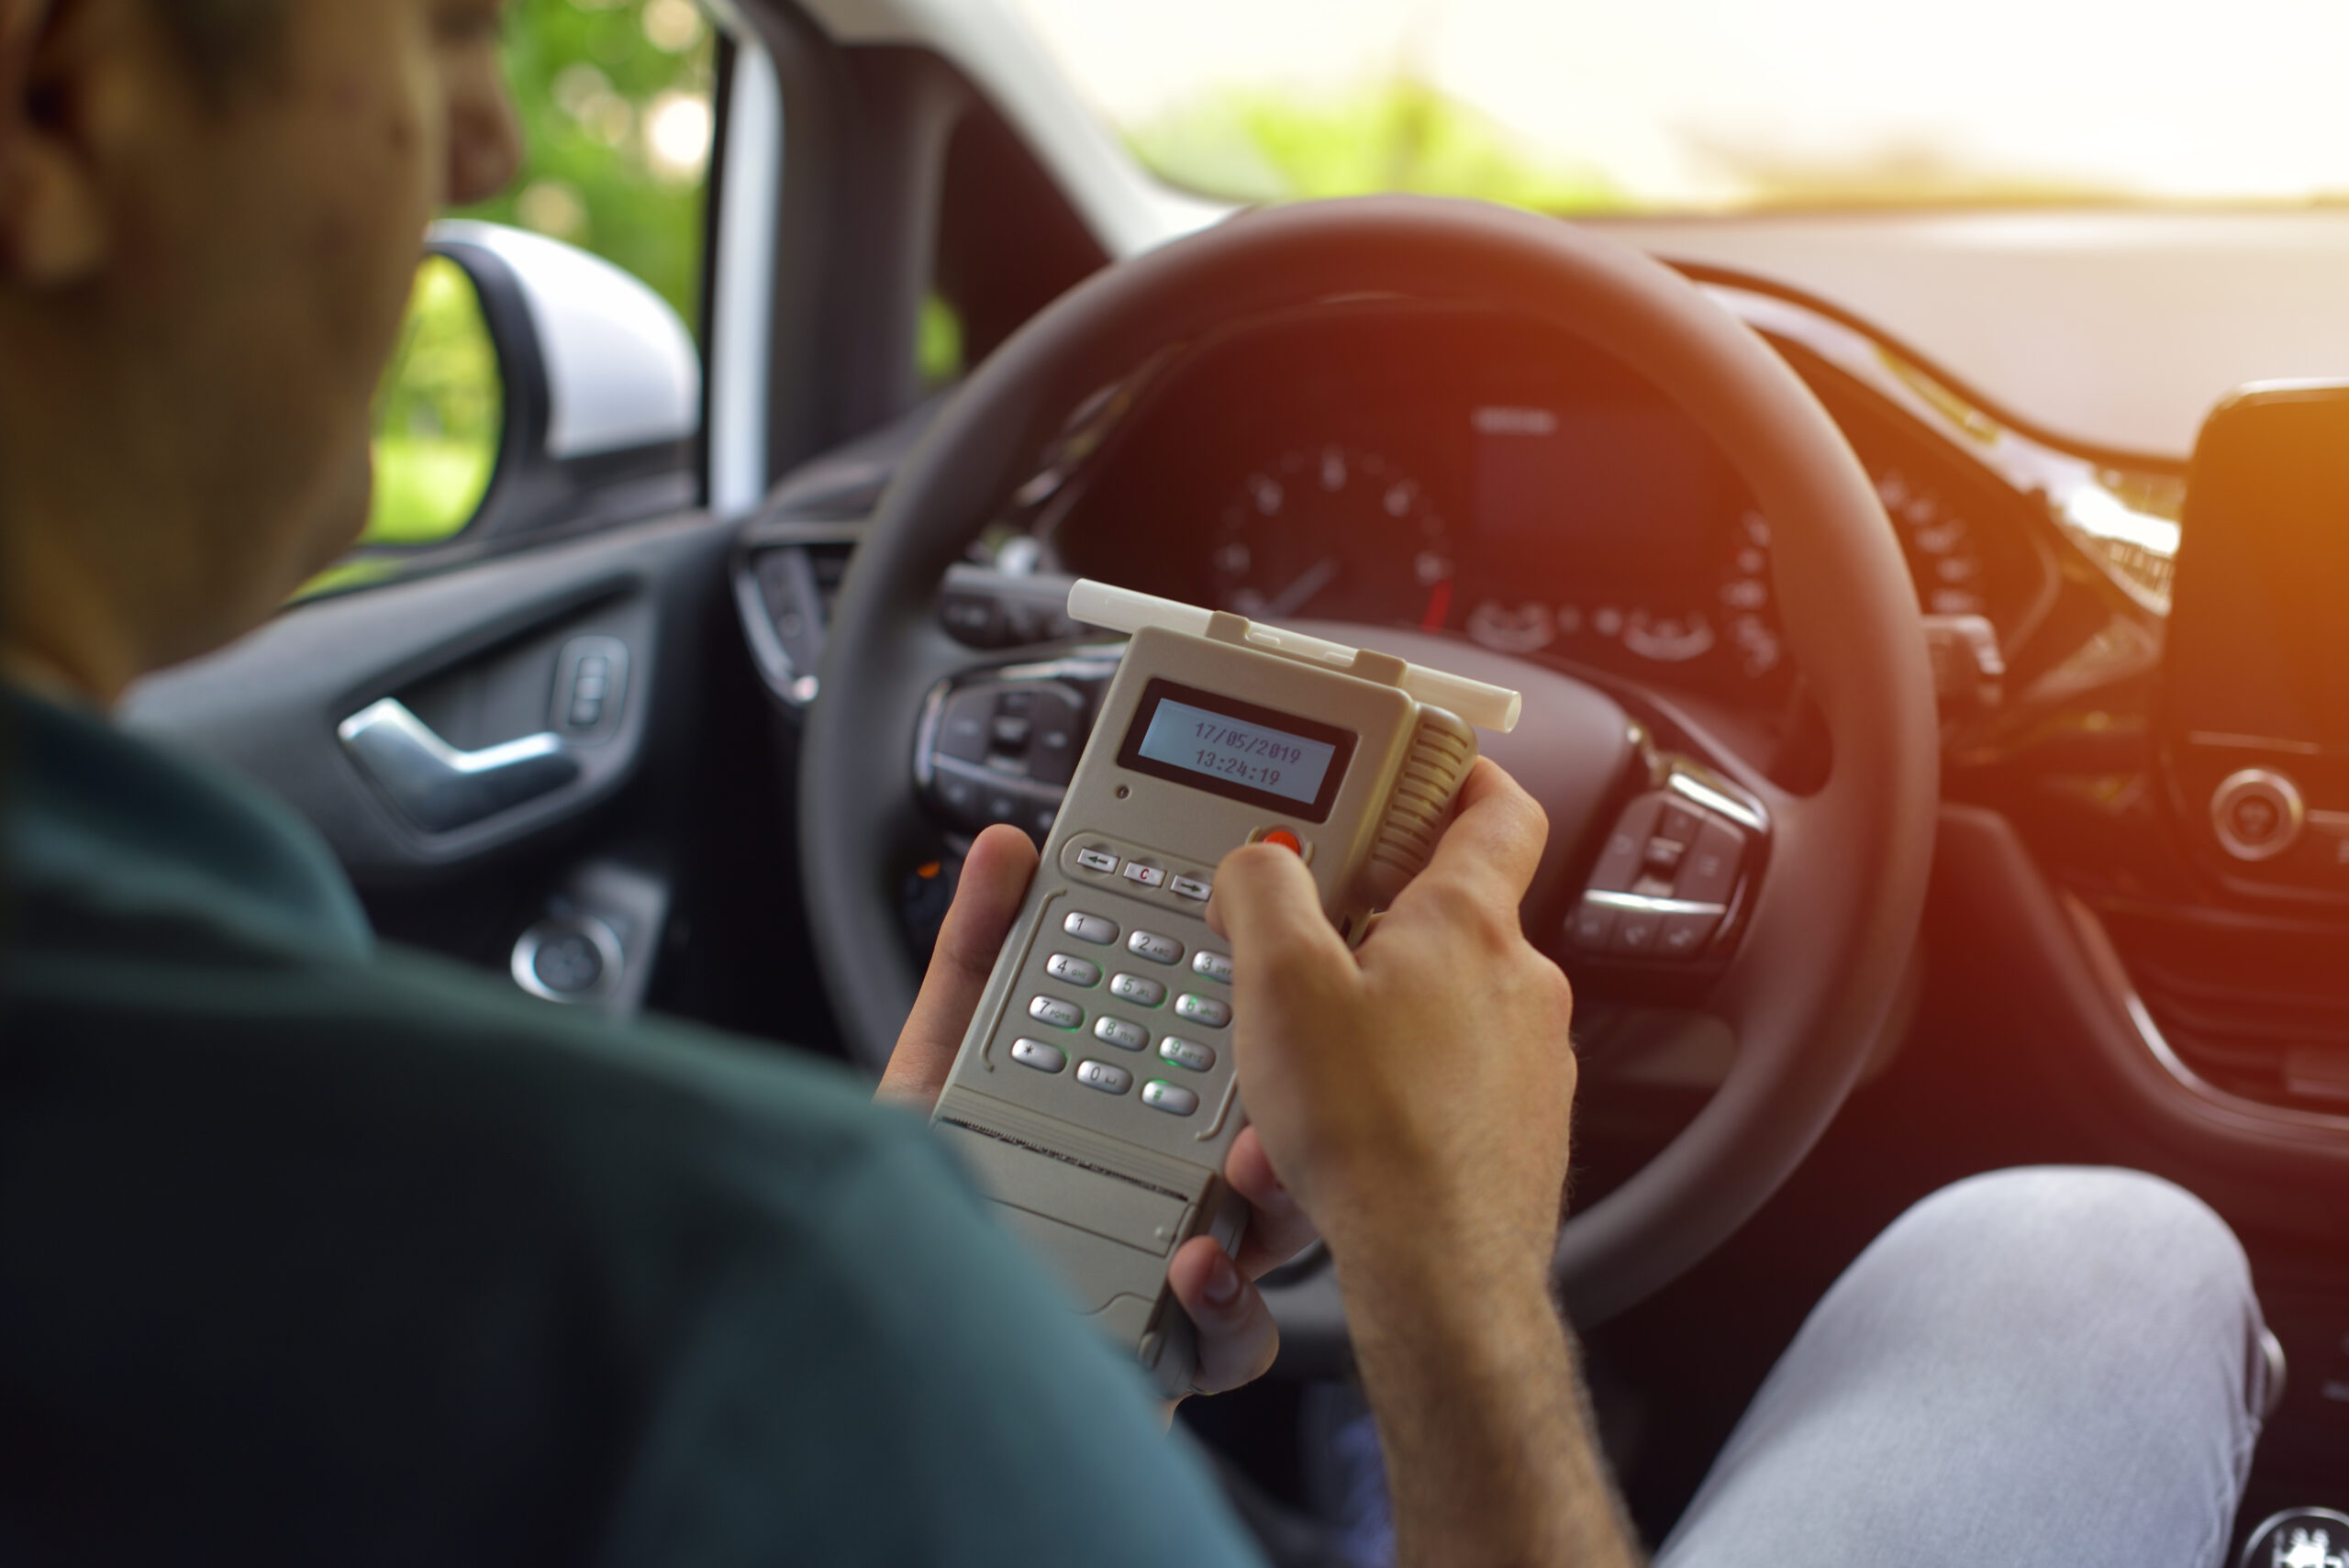 A man in a car holds a calculator displaying 